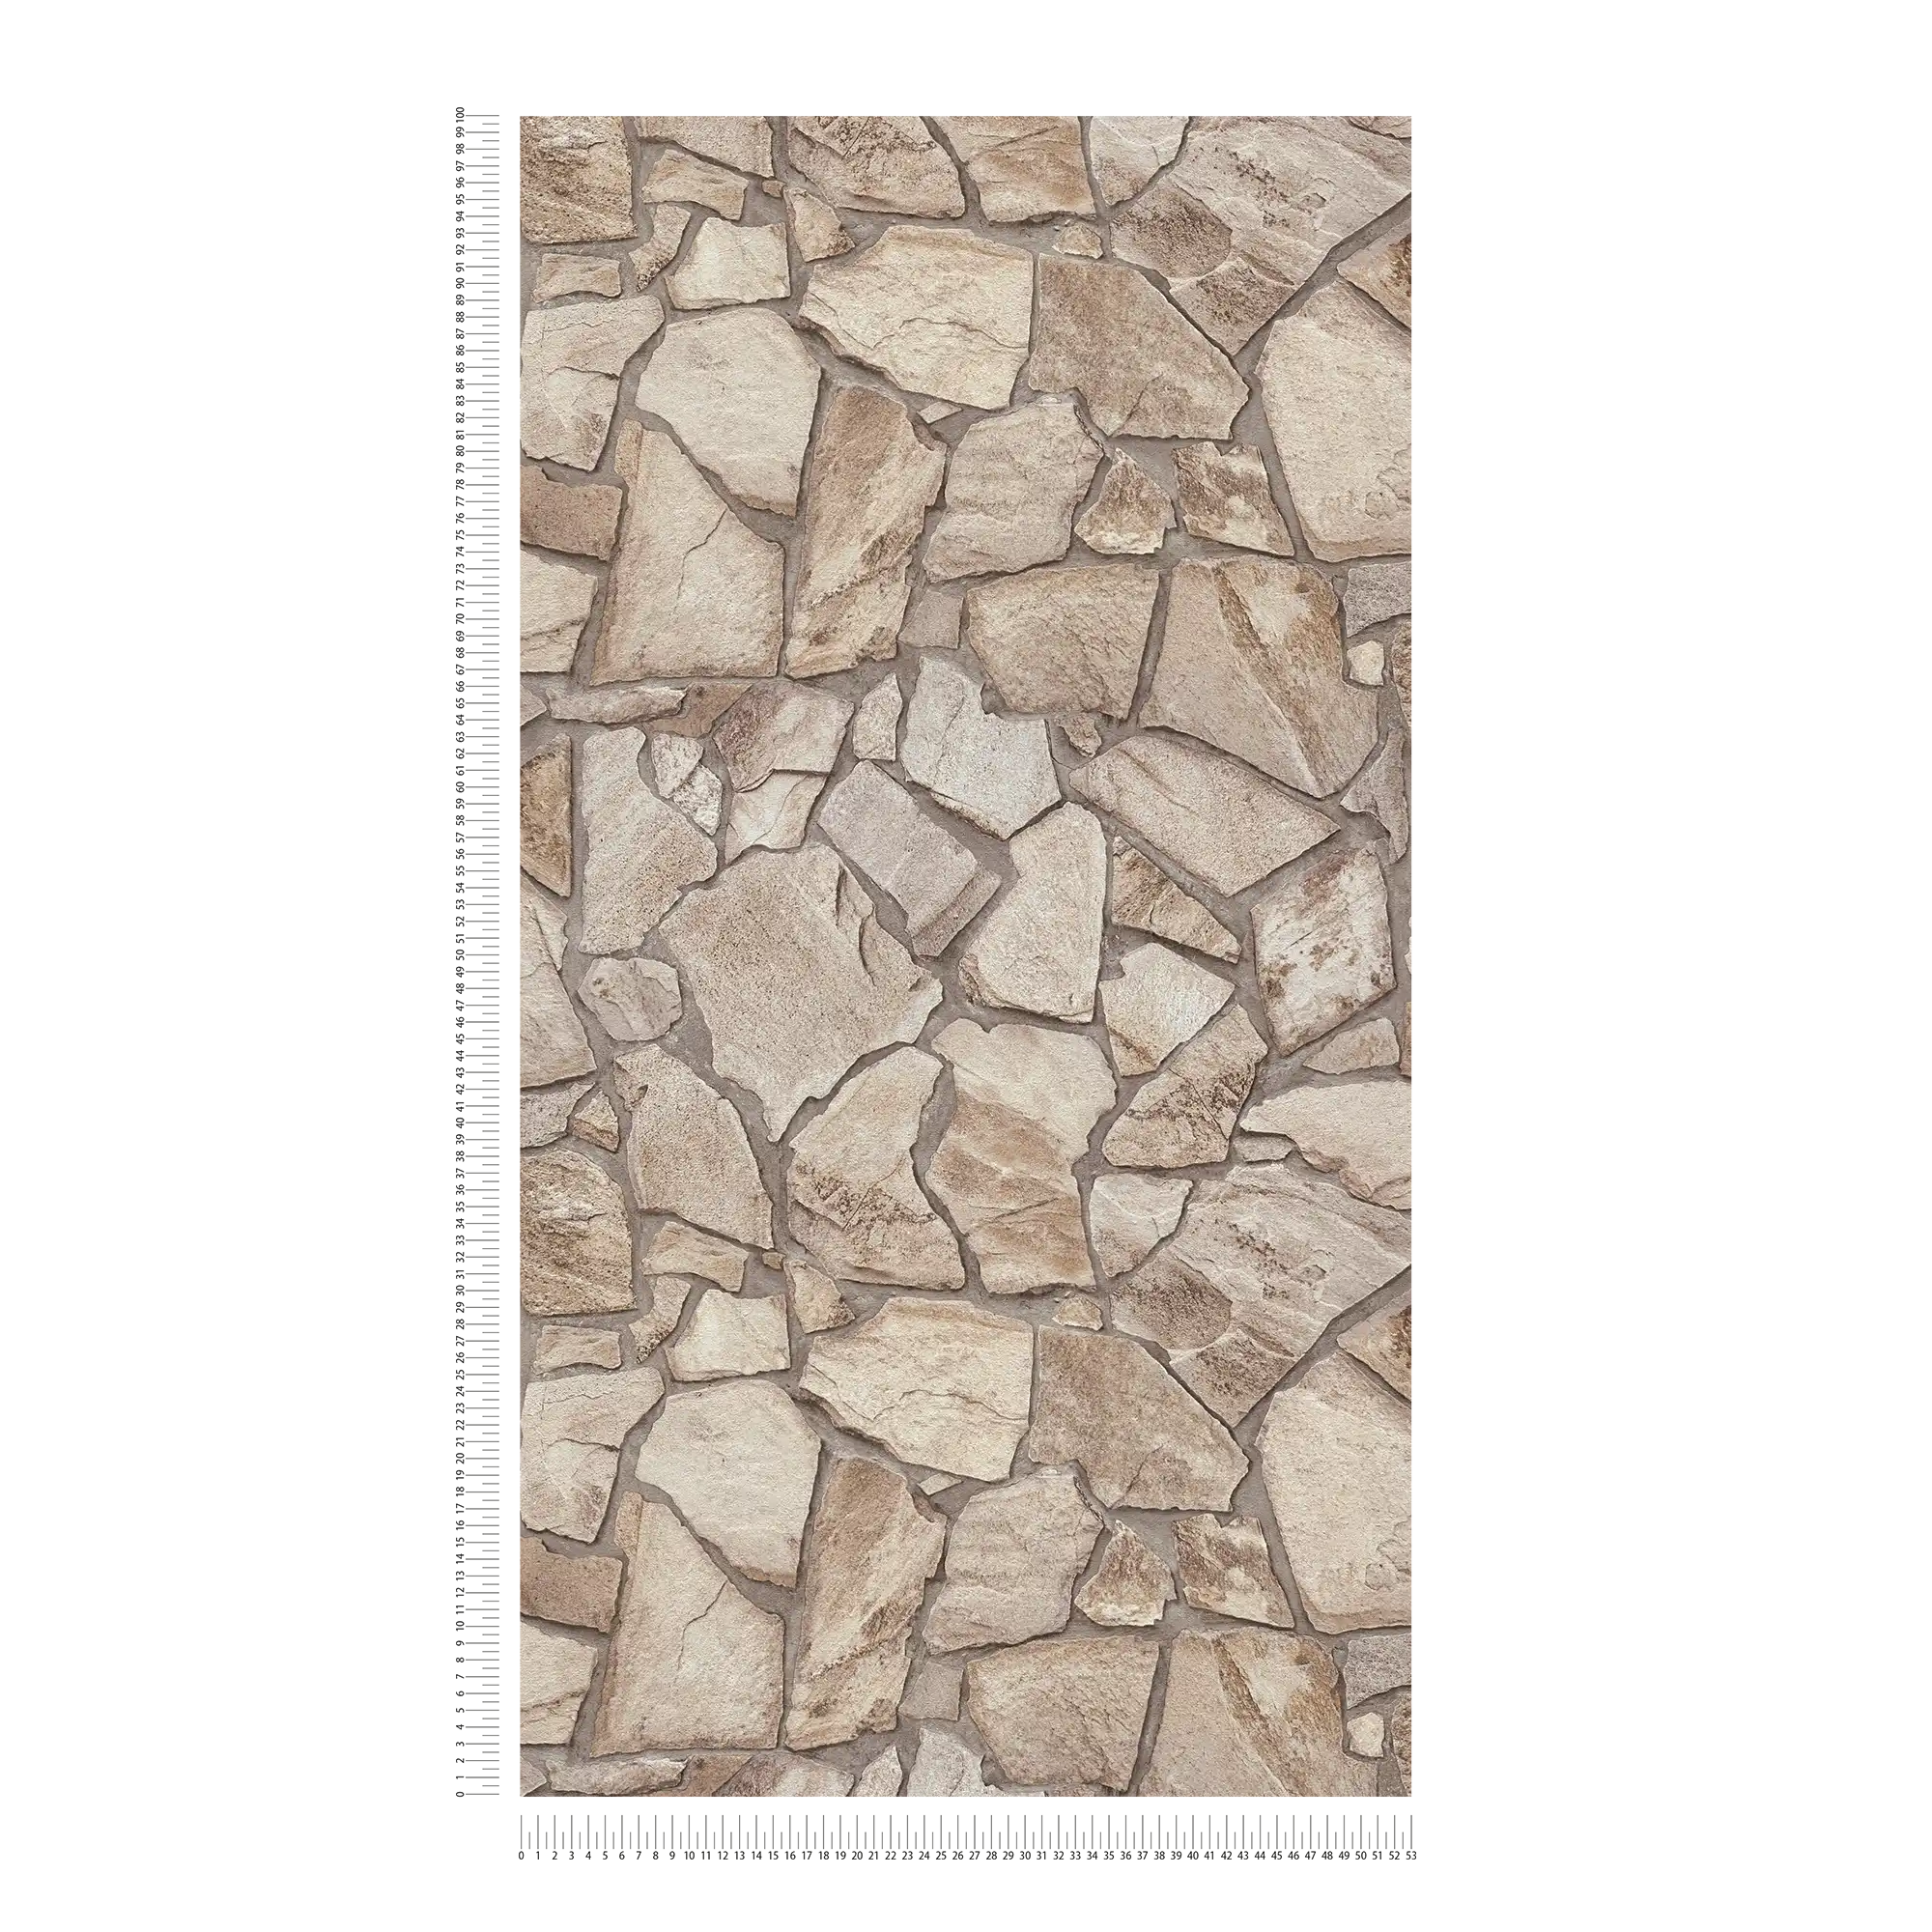             Non-woven wallpaper with stone look wall - brown, grey, beige
        